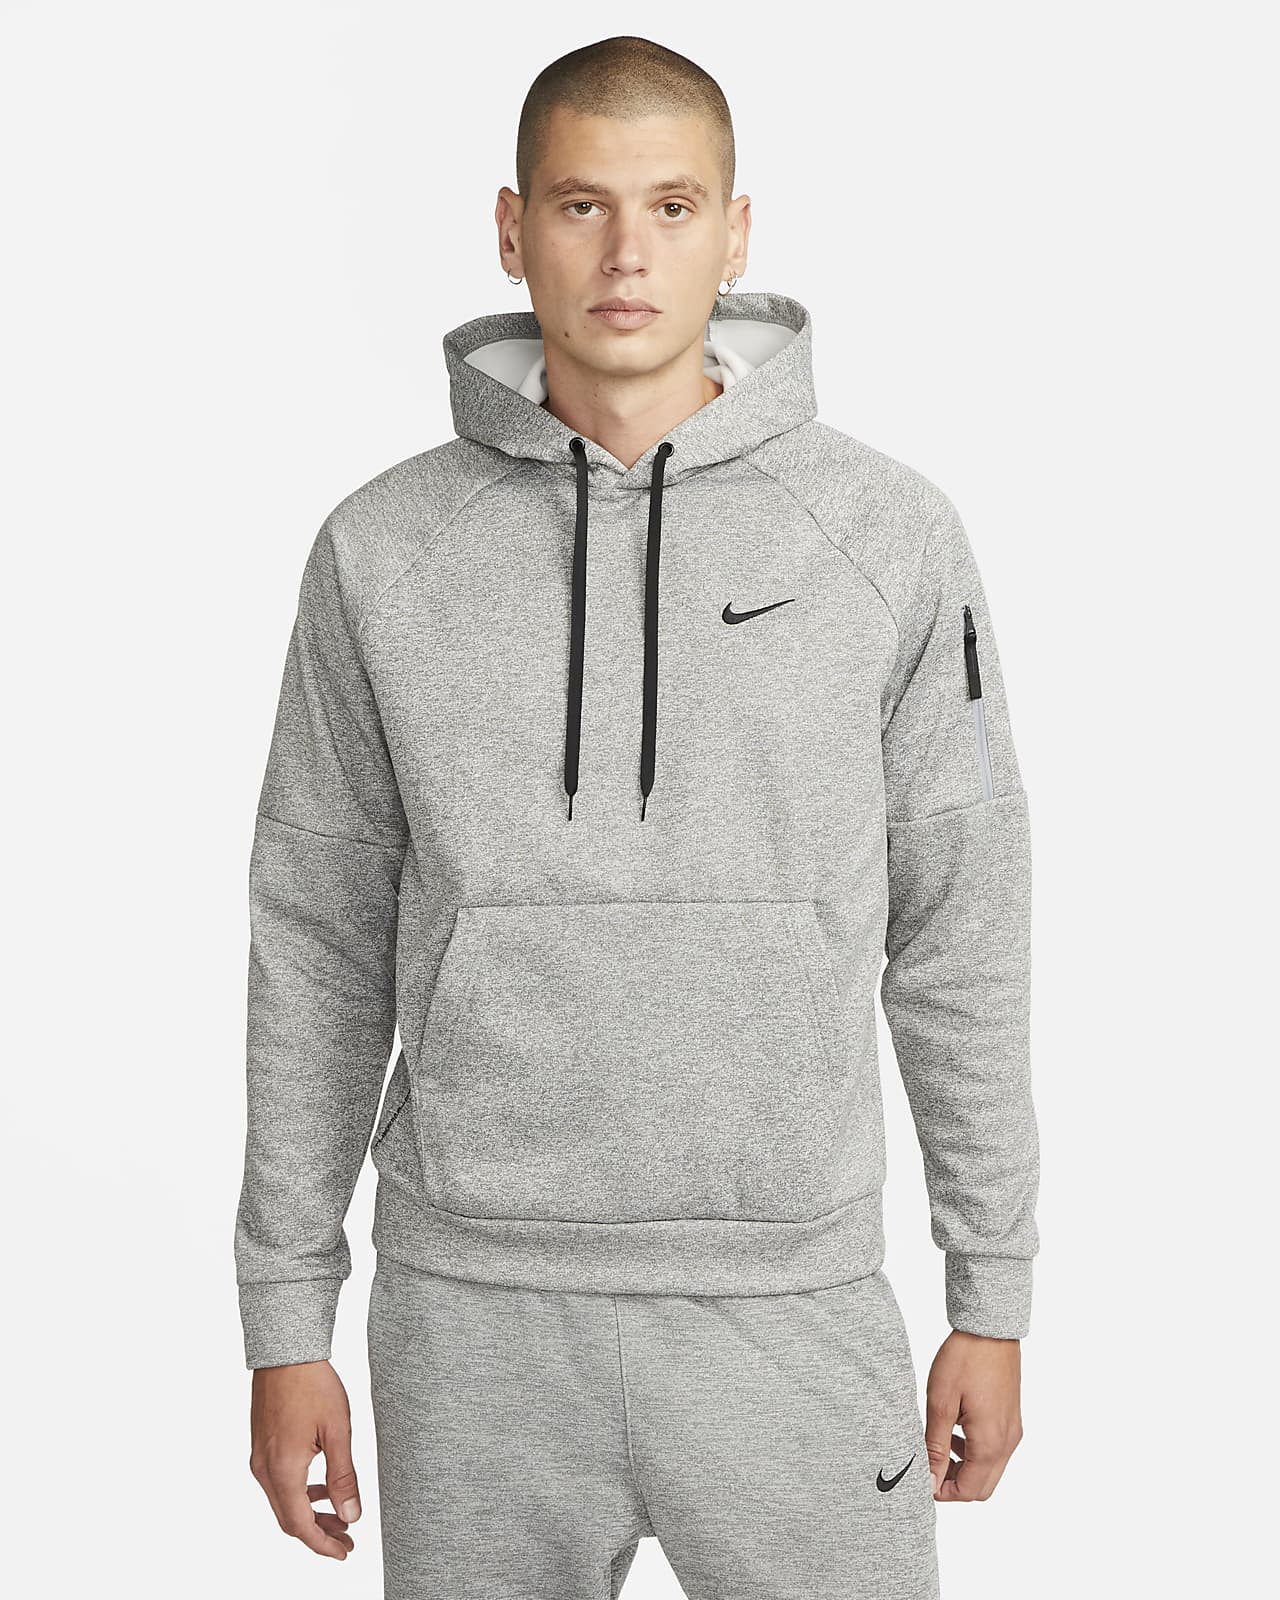 Pull de fitness à capuche Therma-FIT Nike Therma pour homme. Nike LU